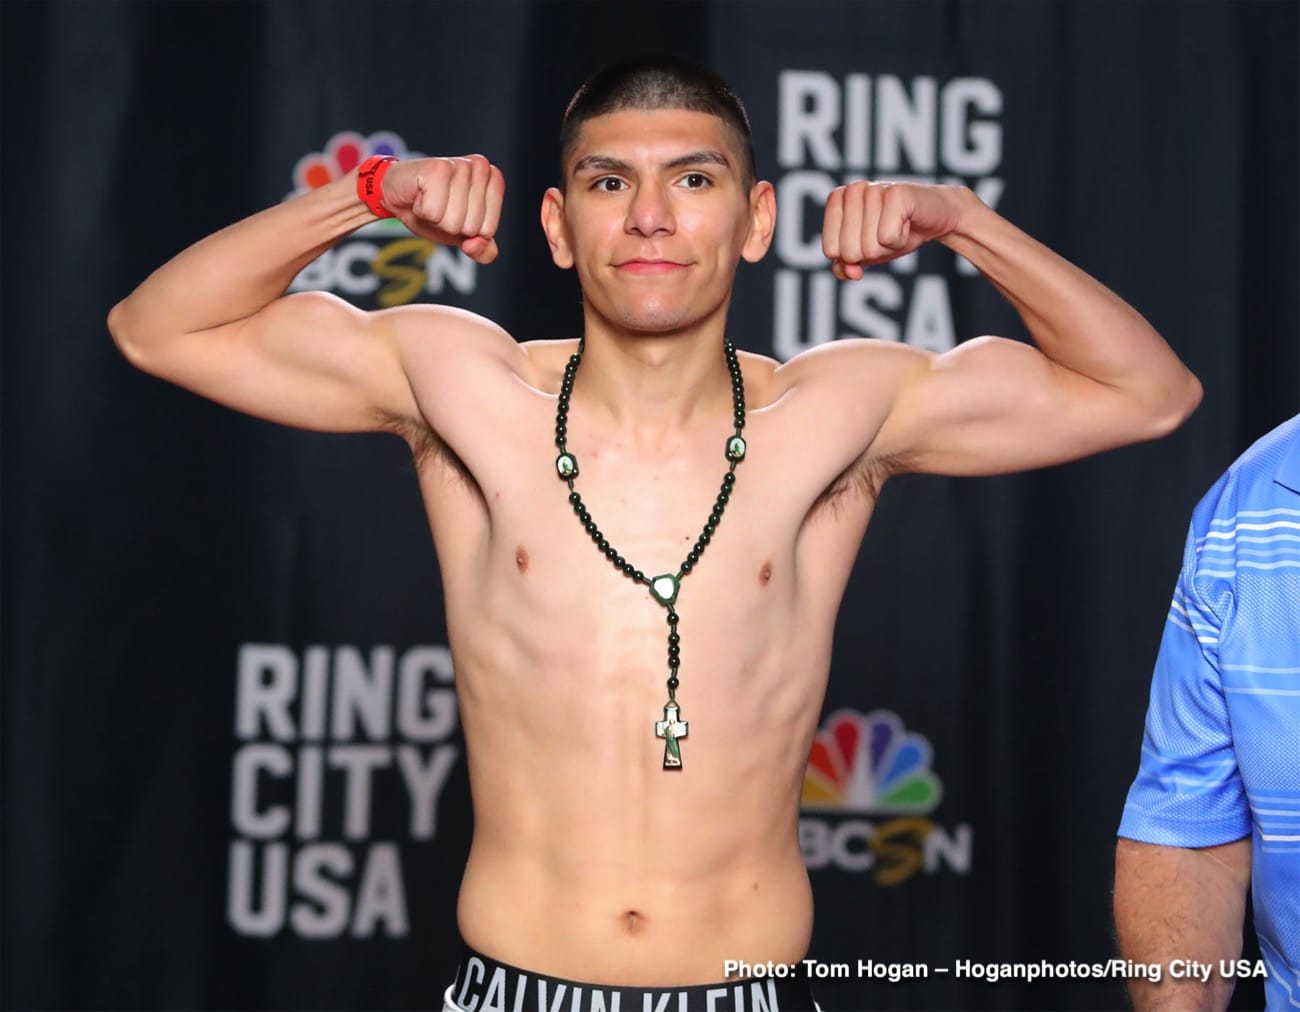 Image: Serrano Vs. Bermudez Official Weights, Photos And Officials